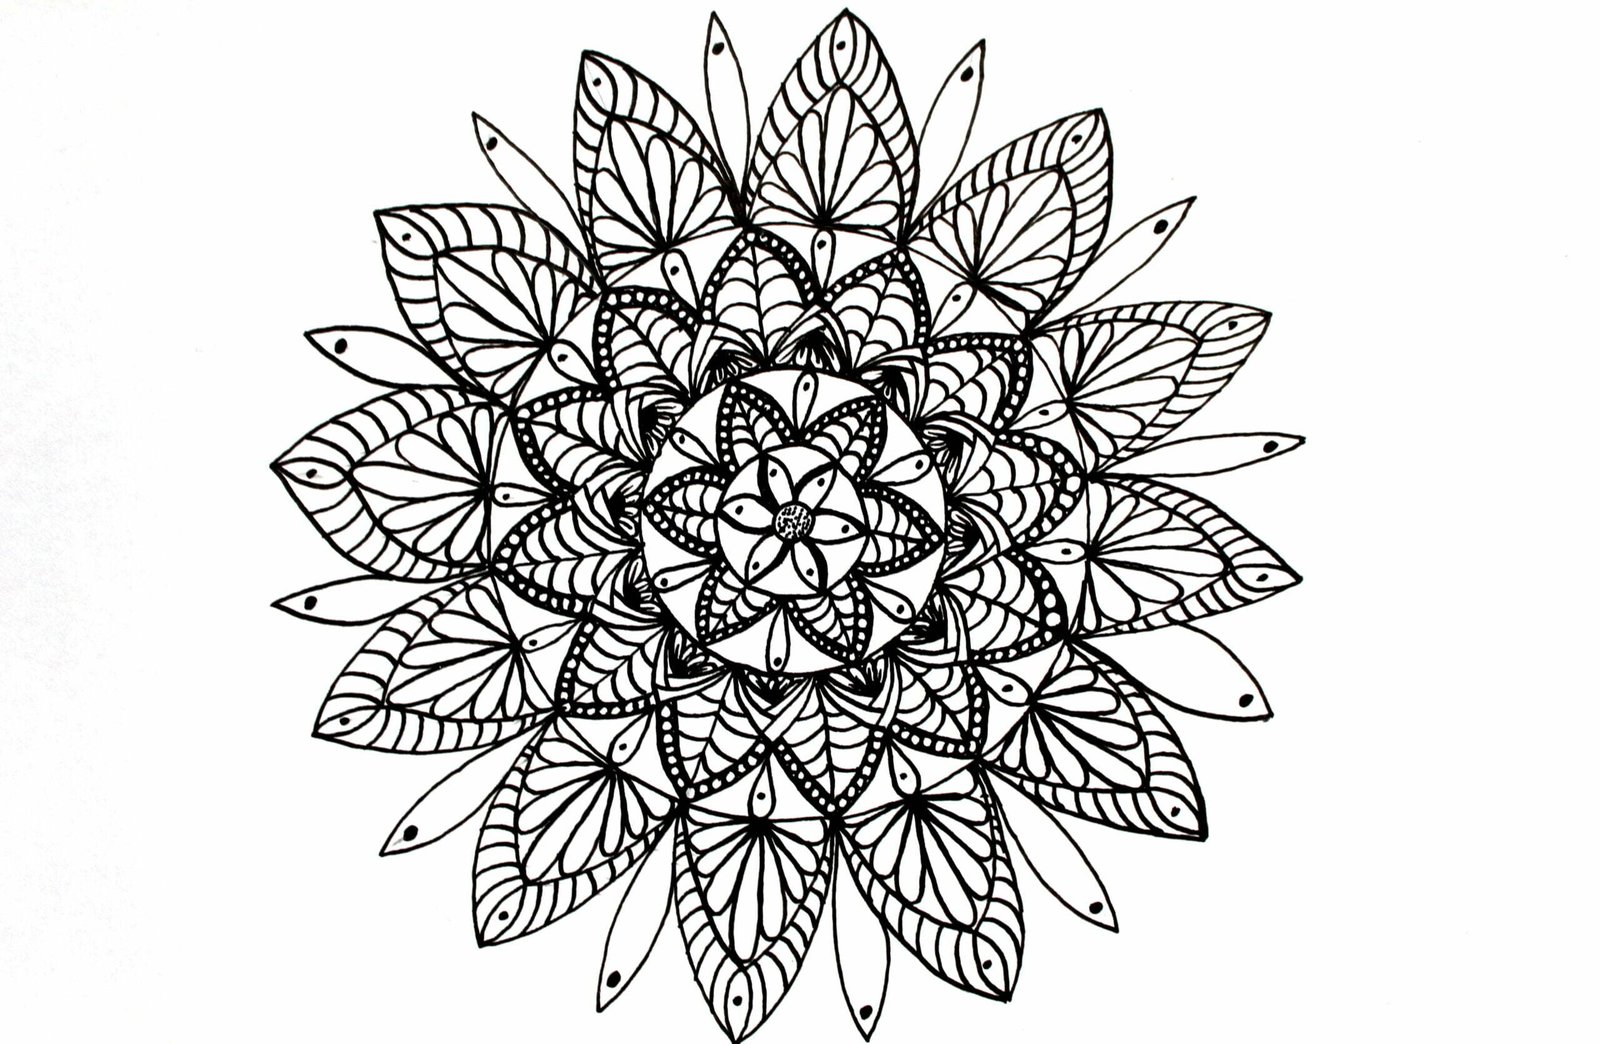 Outline Round Floral Pattern For Coloring The Book Page. Antistress  Coloring For Adults And Children. Doodle Pattern In Black And White. Hand  Draw Vector Illustration. Royalty Free SVG, Cliparts, Vectors, and Stock